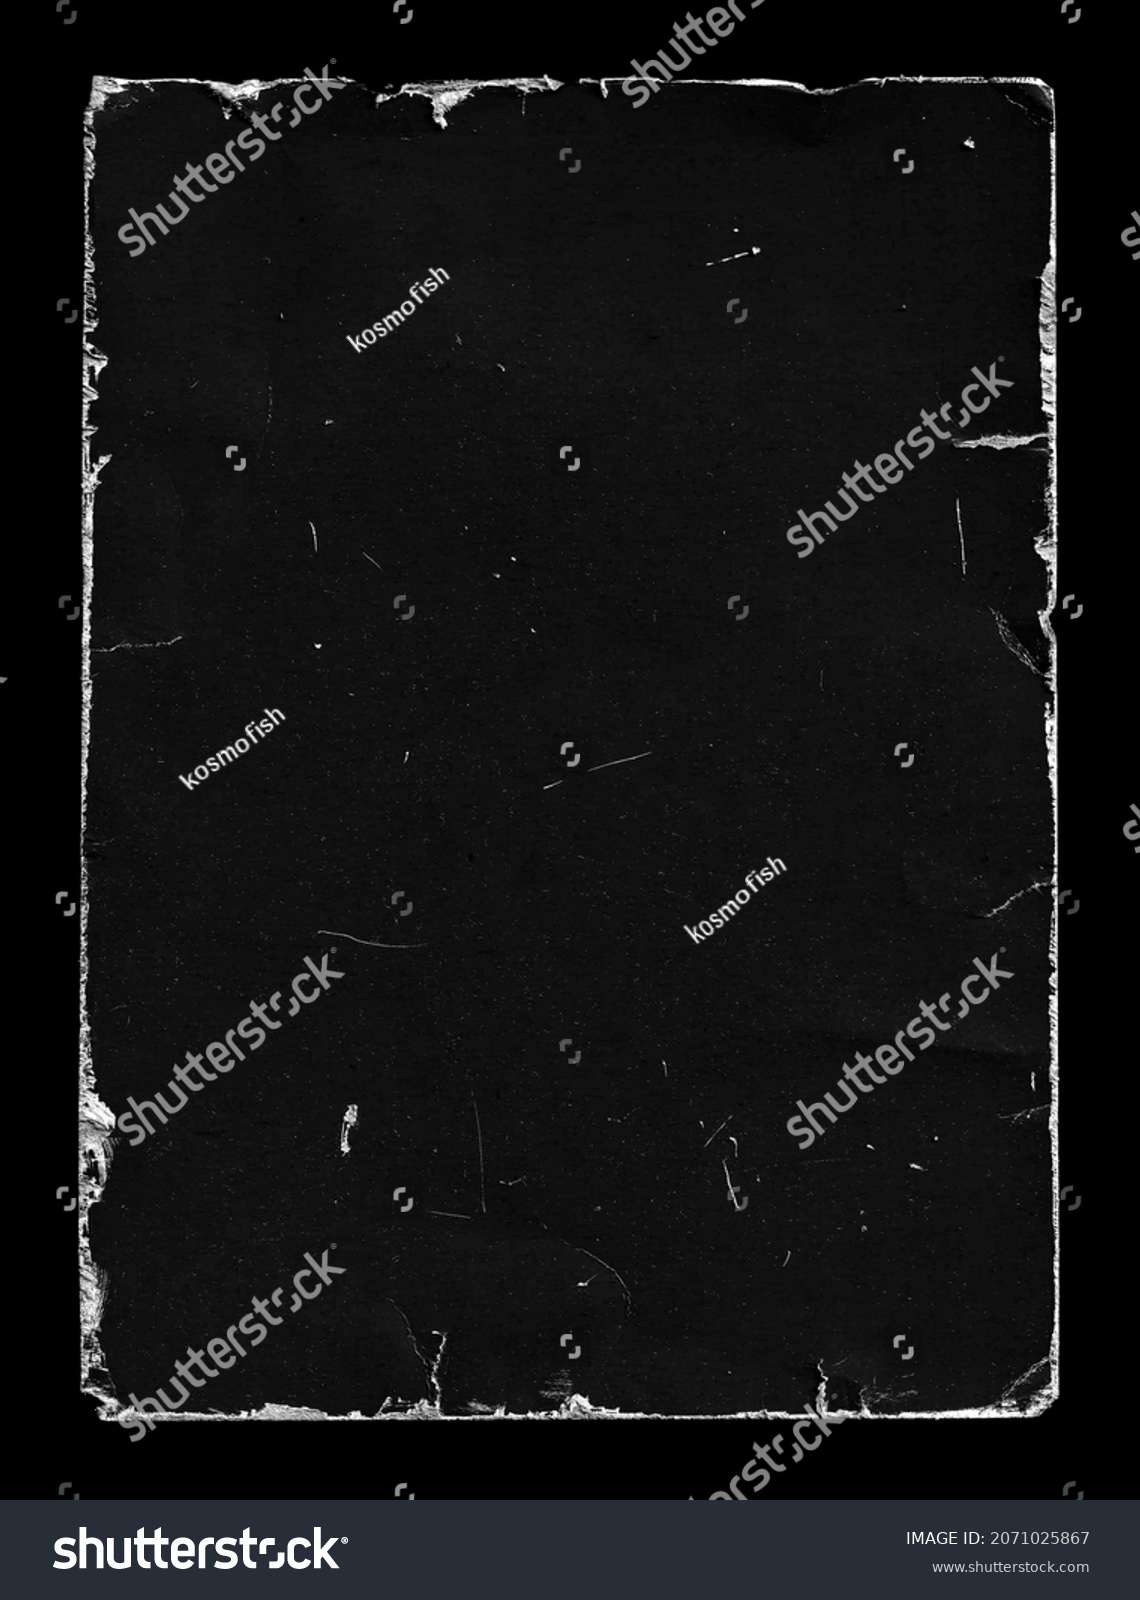 Old Black Empty Aged Damaged Paper Poster Cardboard Photo Card. Rough Grunge Shabby Scratched Torn Ripped Texture. Distressed Overlay Surface for Collage. High Quality. #2071025867